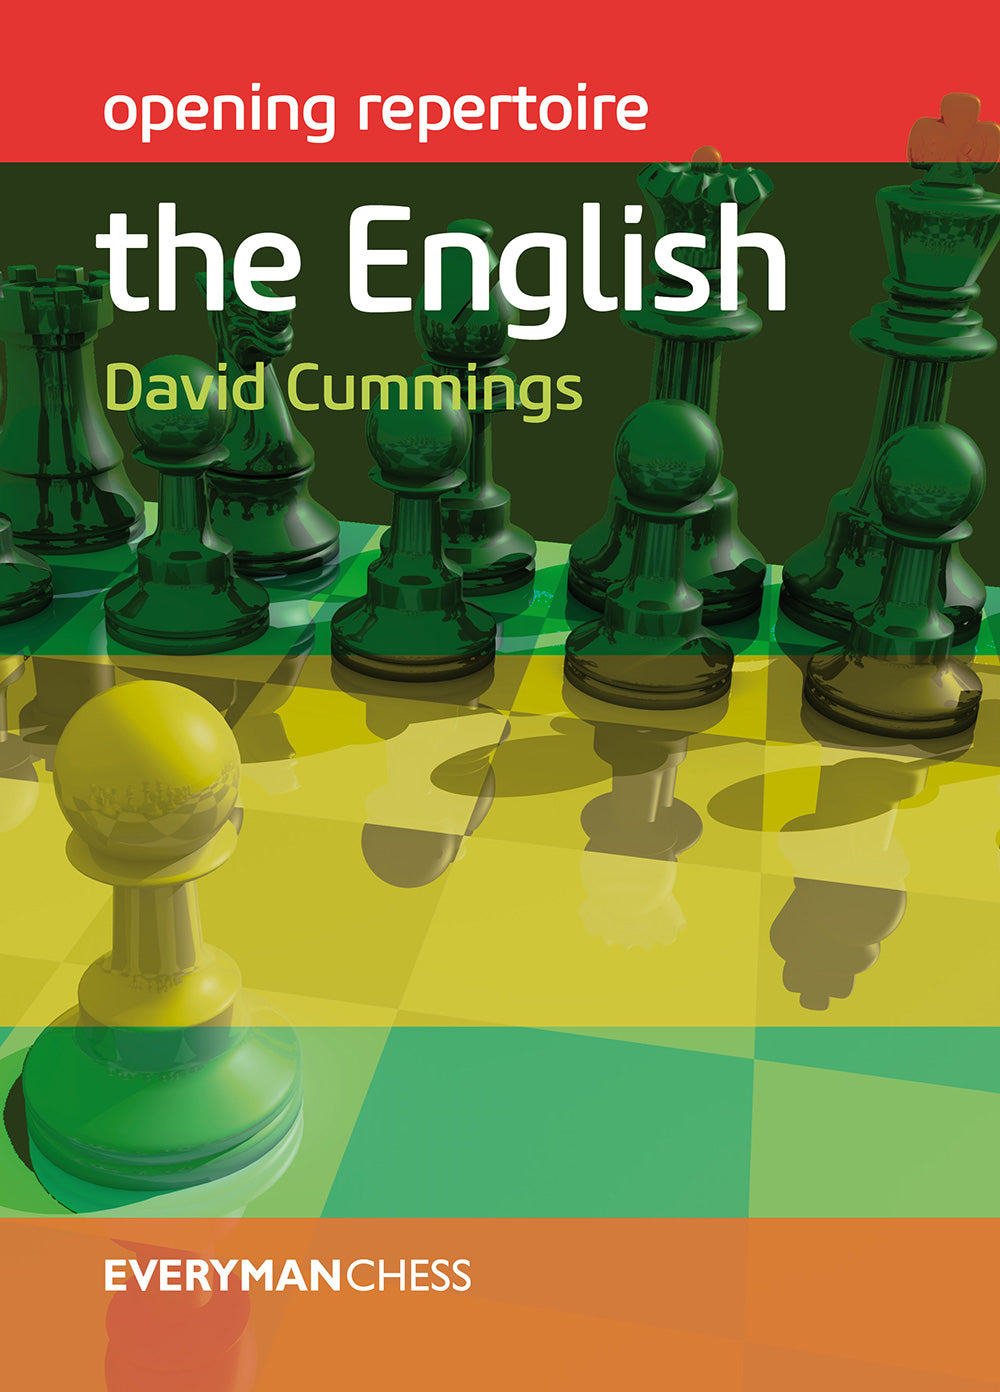 Play The English Opening! Chess Lesson # 152 